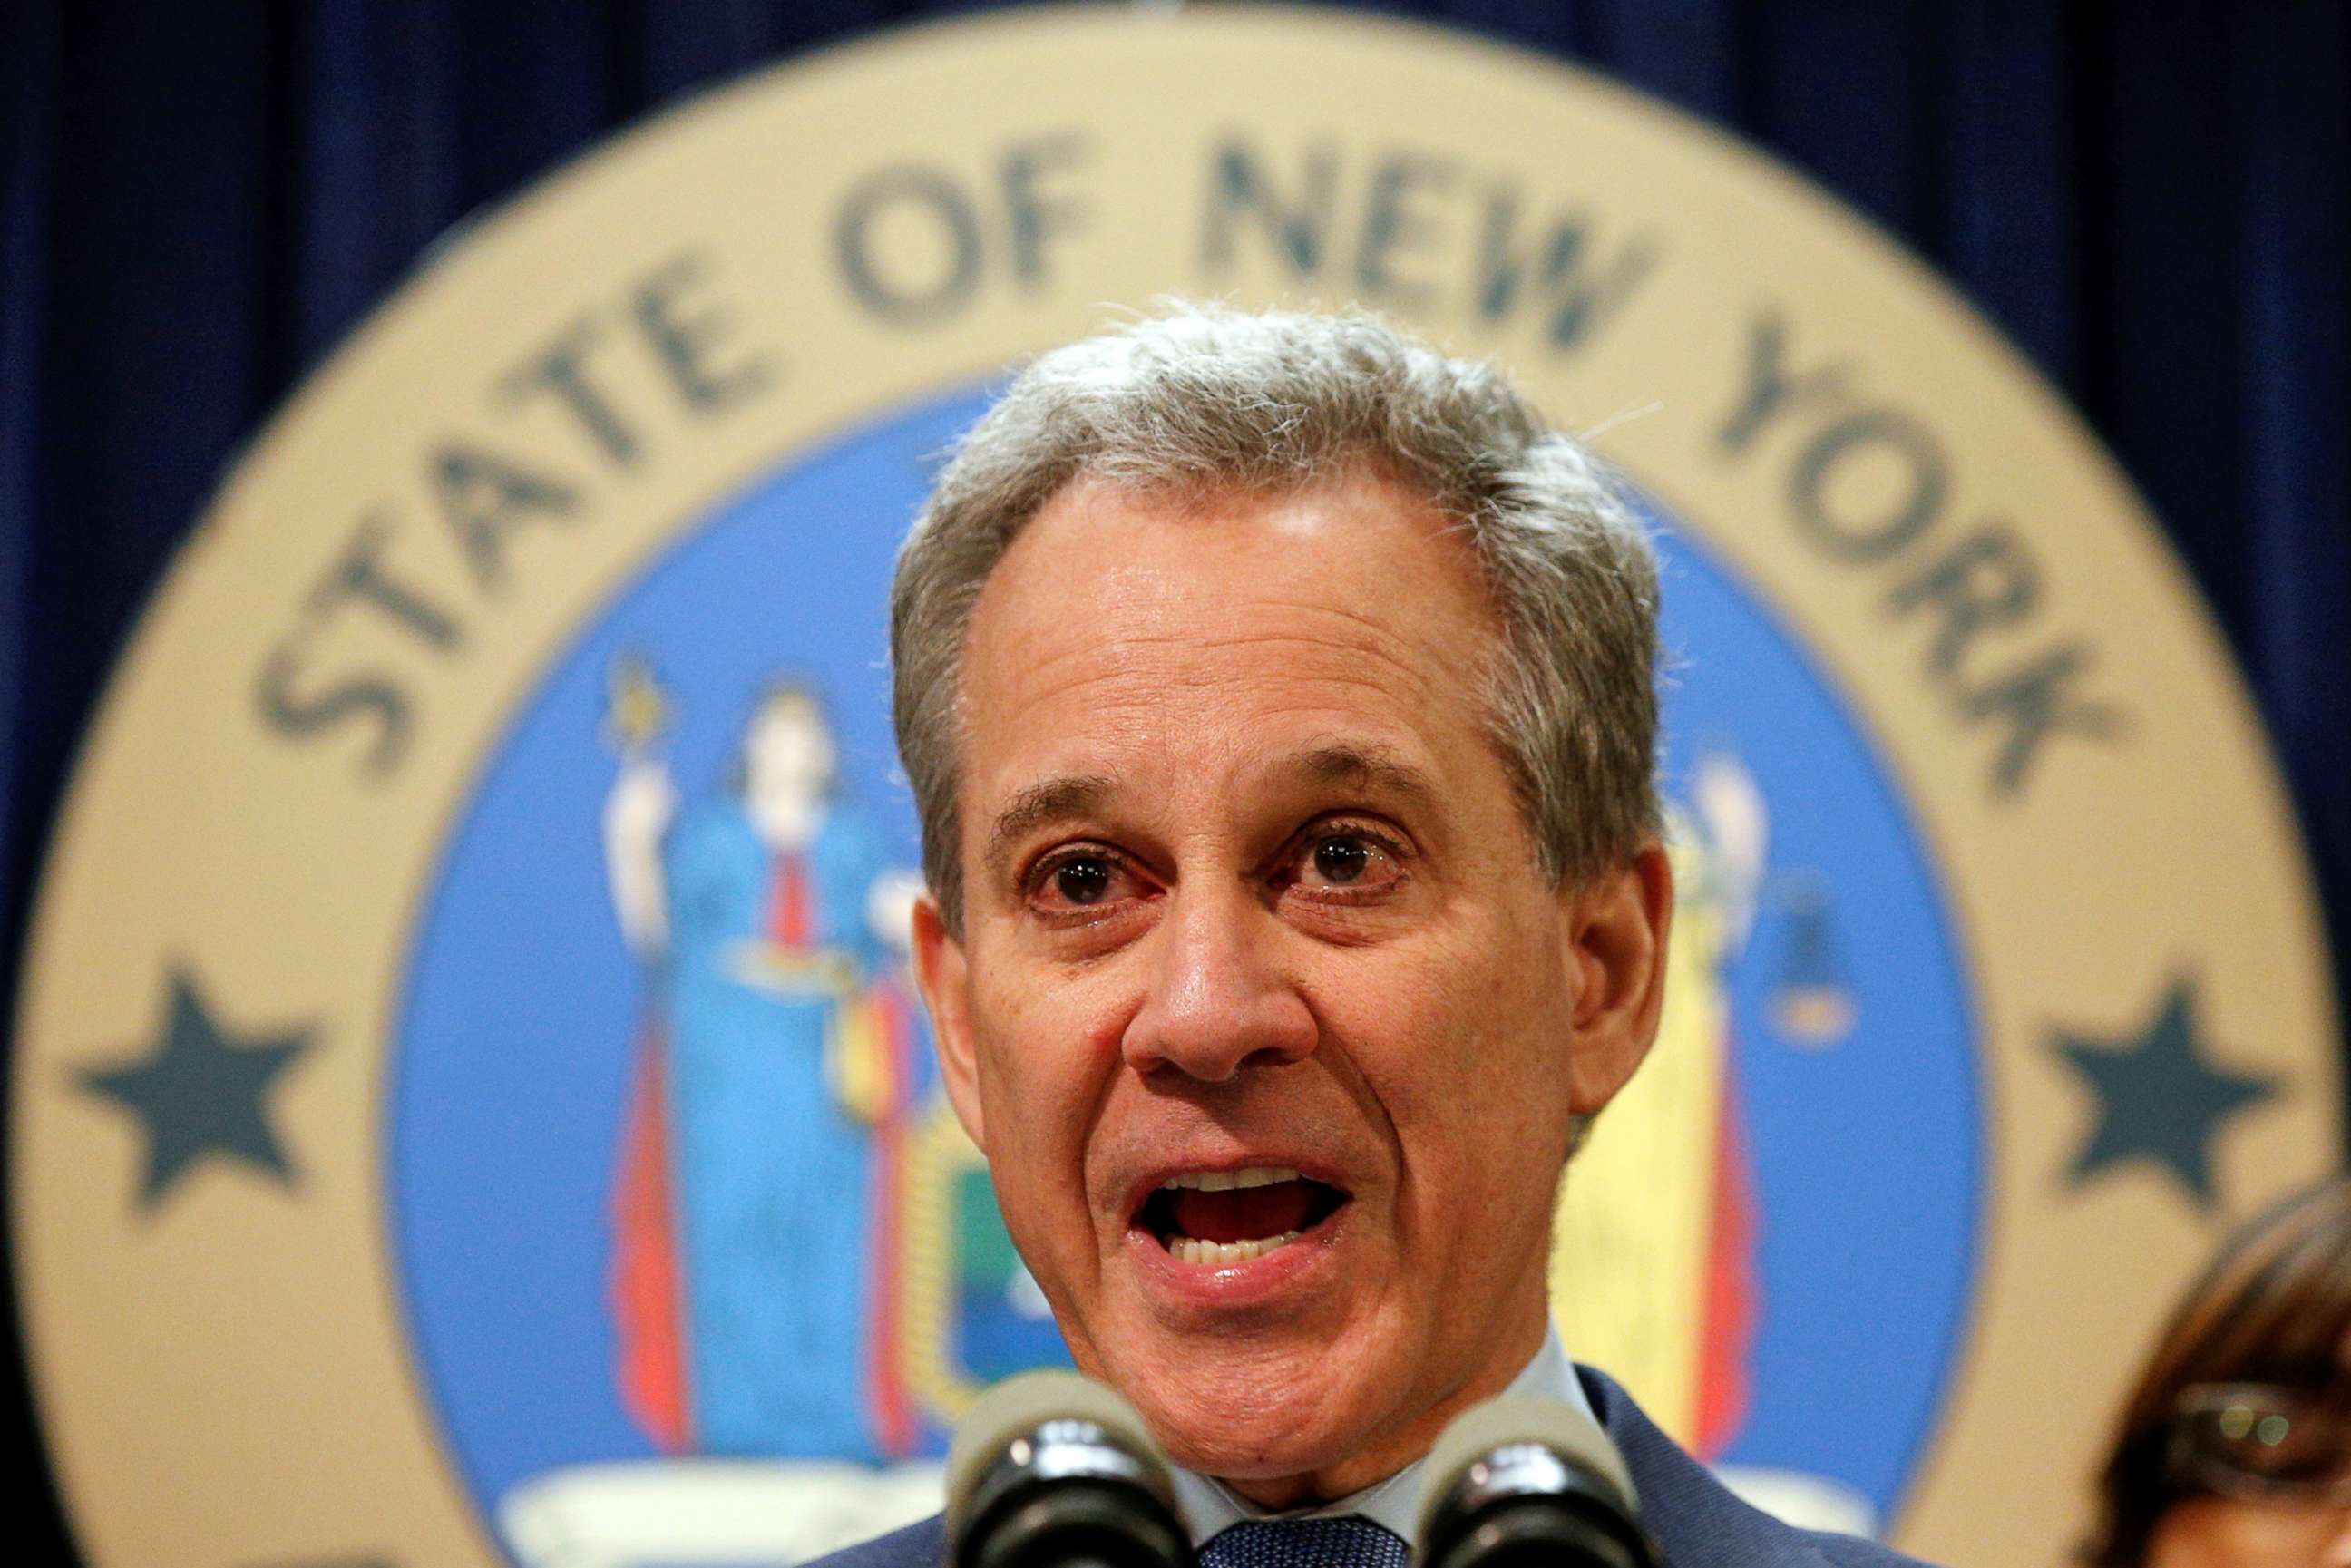 PHOTO: New York Attorney General Eric Schneiderman speaks during a news conference to discuss the civil rights lawsuit filed against The Weinstein Companies and Harvey Weinstein in New York, Feb. 12, 2018.